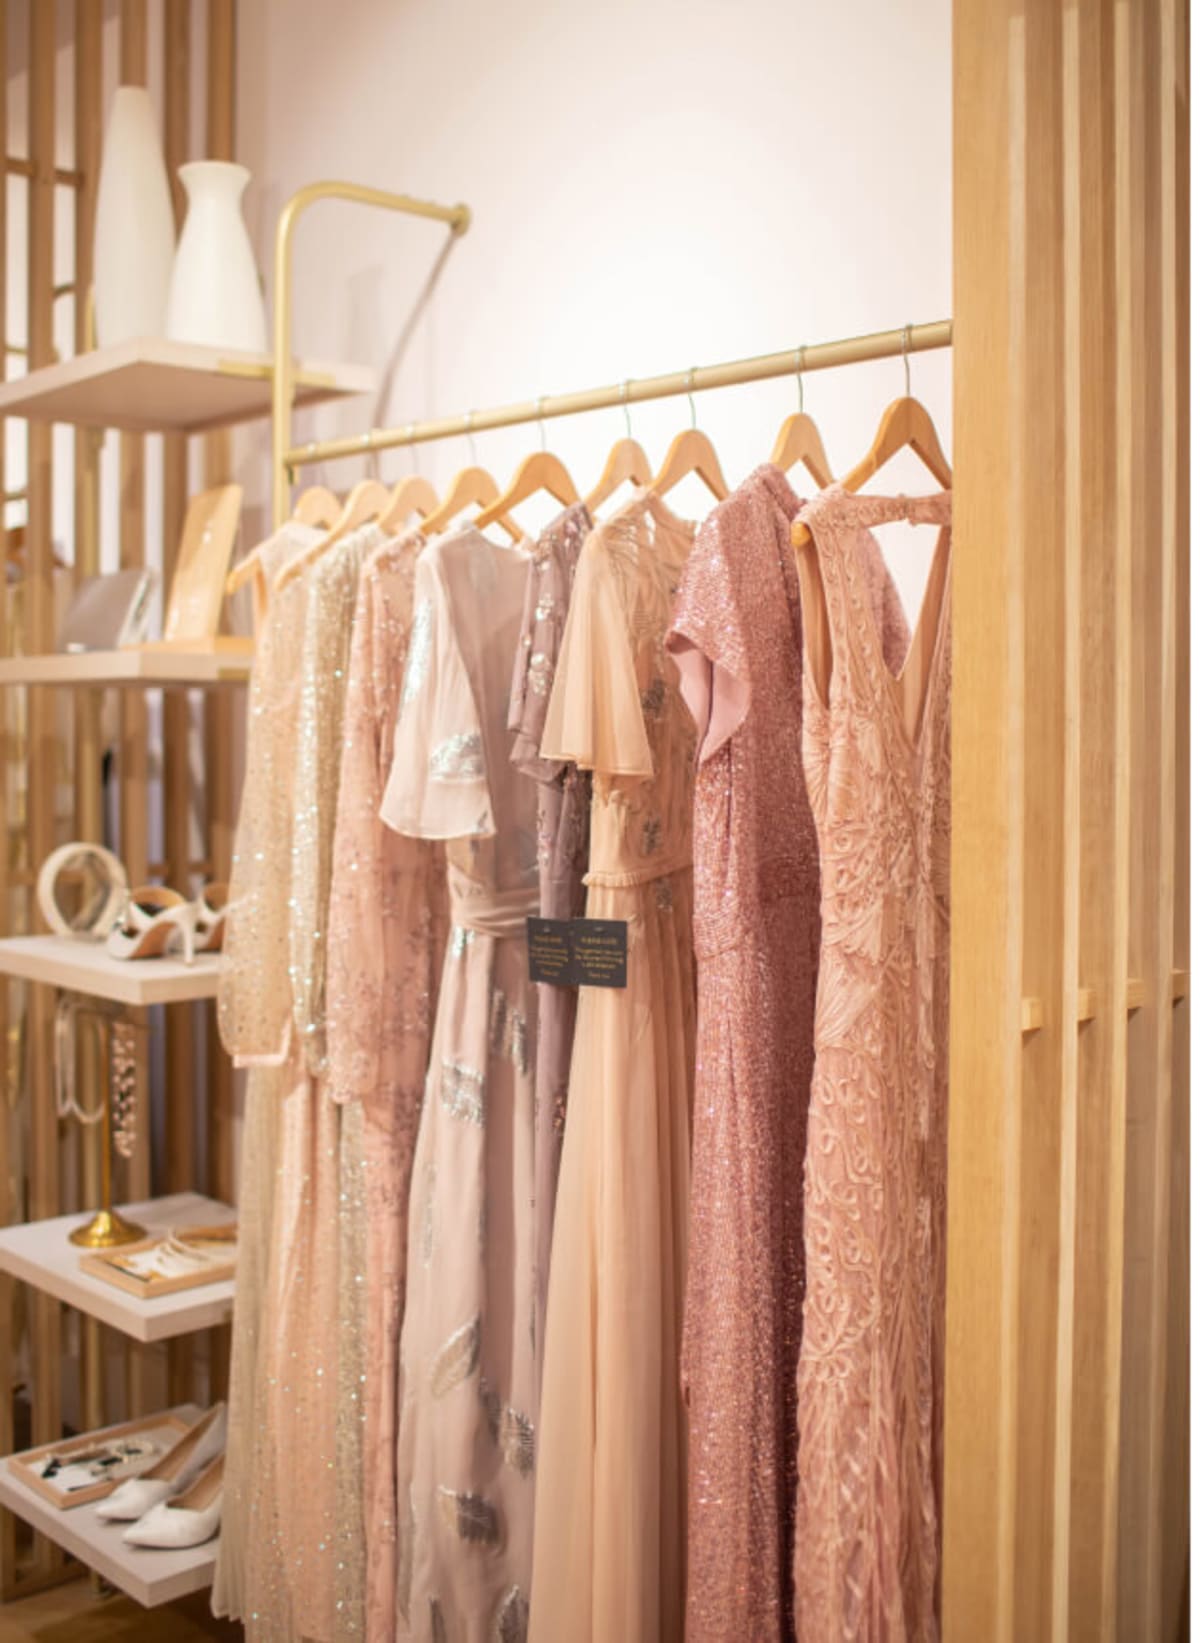 Occasion dresses on a rail in store